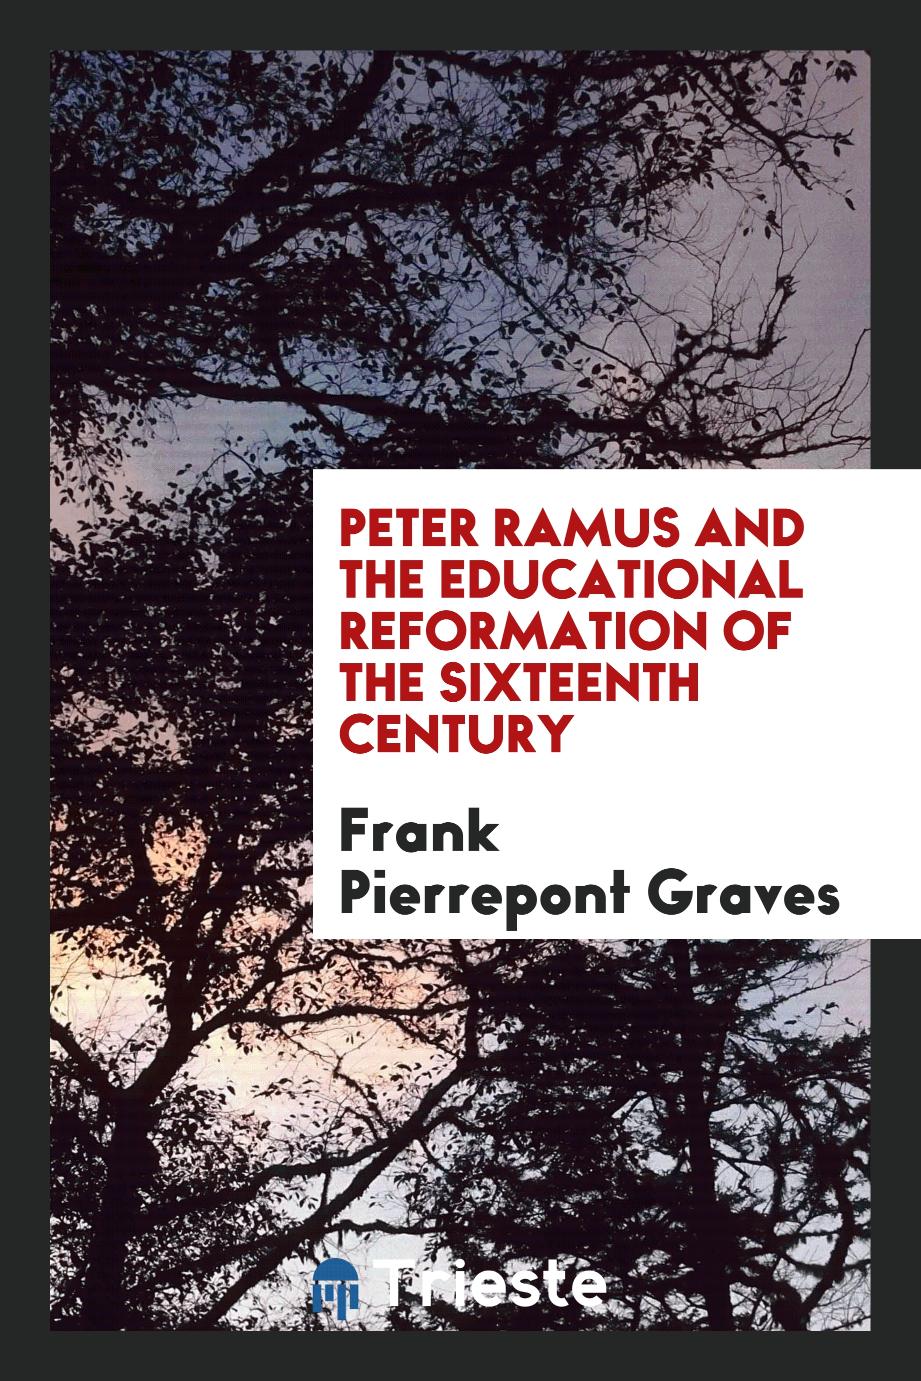 Peter Ramus and the educational reformation of the sixteenth century